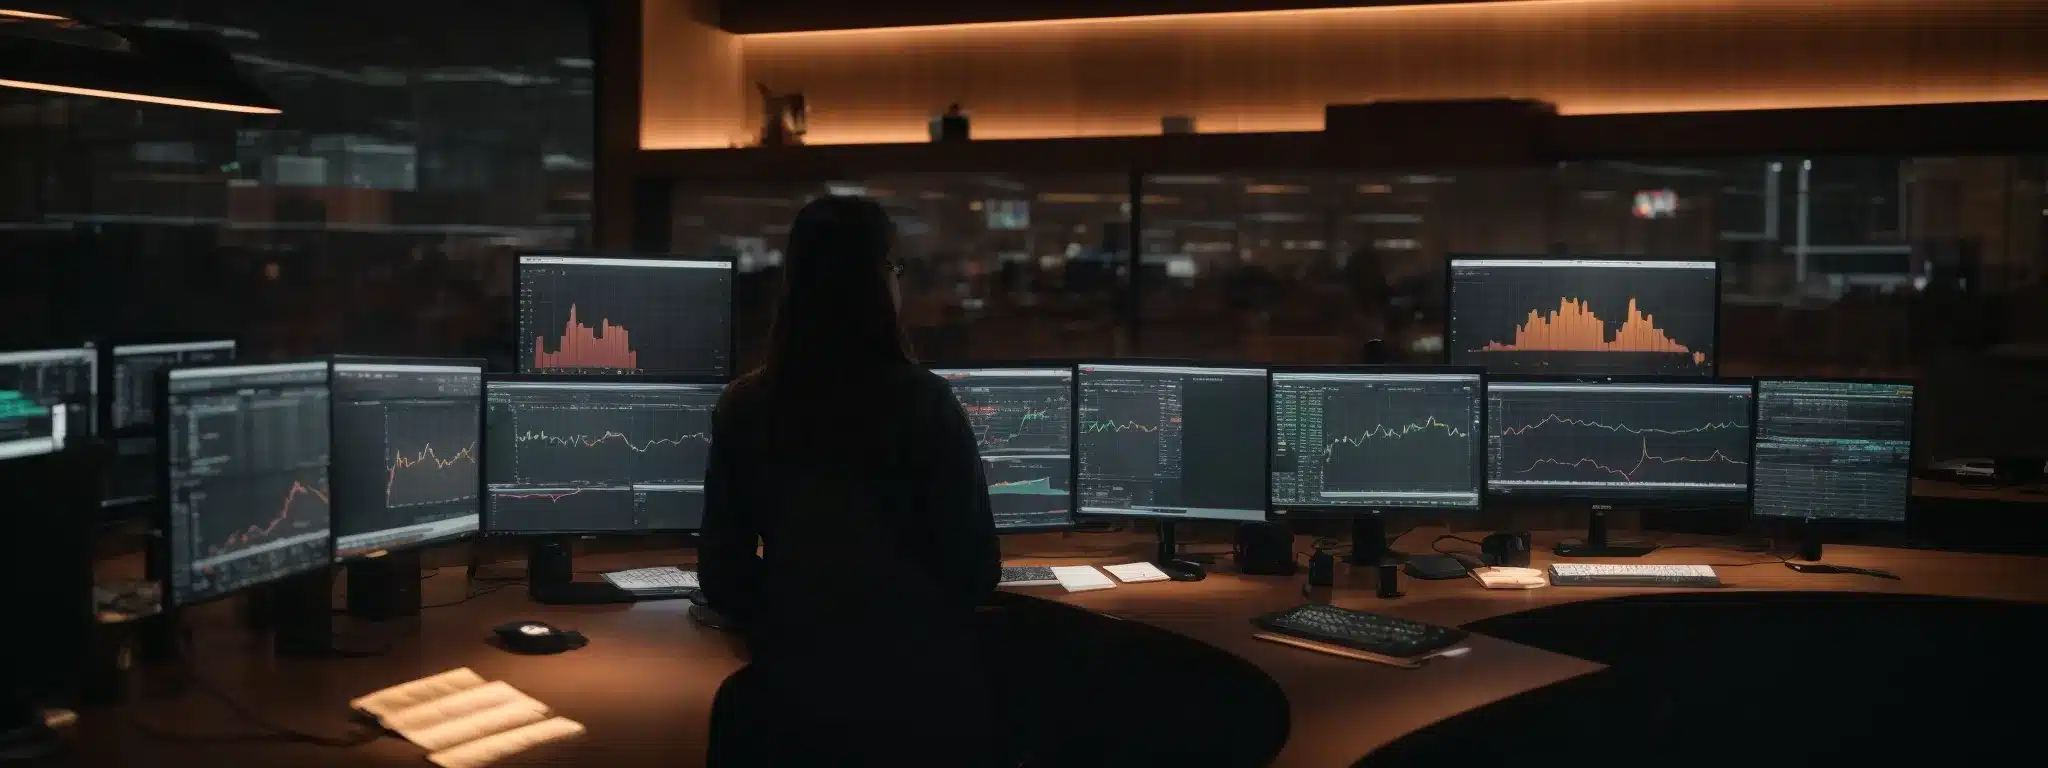 A Solitary Figure Sits Before A Trio Of Computer Monitors, Vibrant Graphs And Charts Sprawling Across The Screens As The Glow Of Data Fills The Room With A Warm Ambiance.